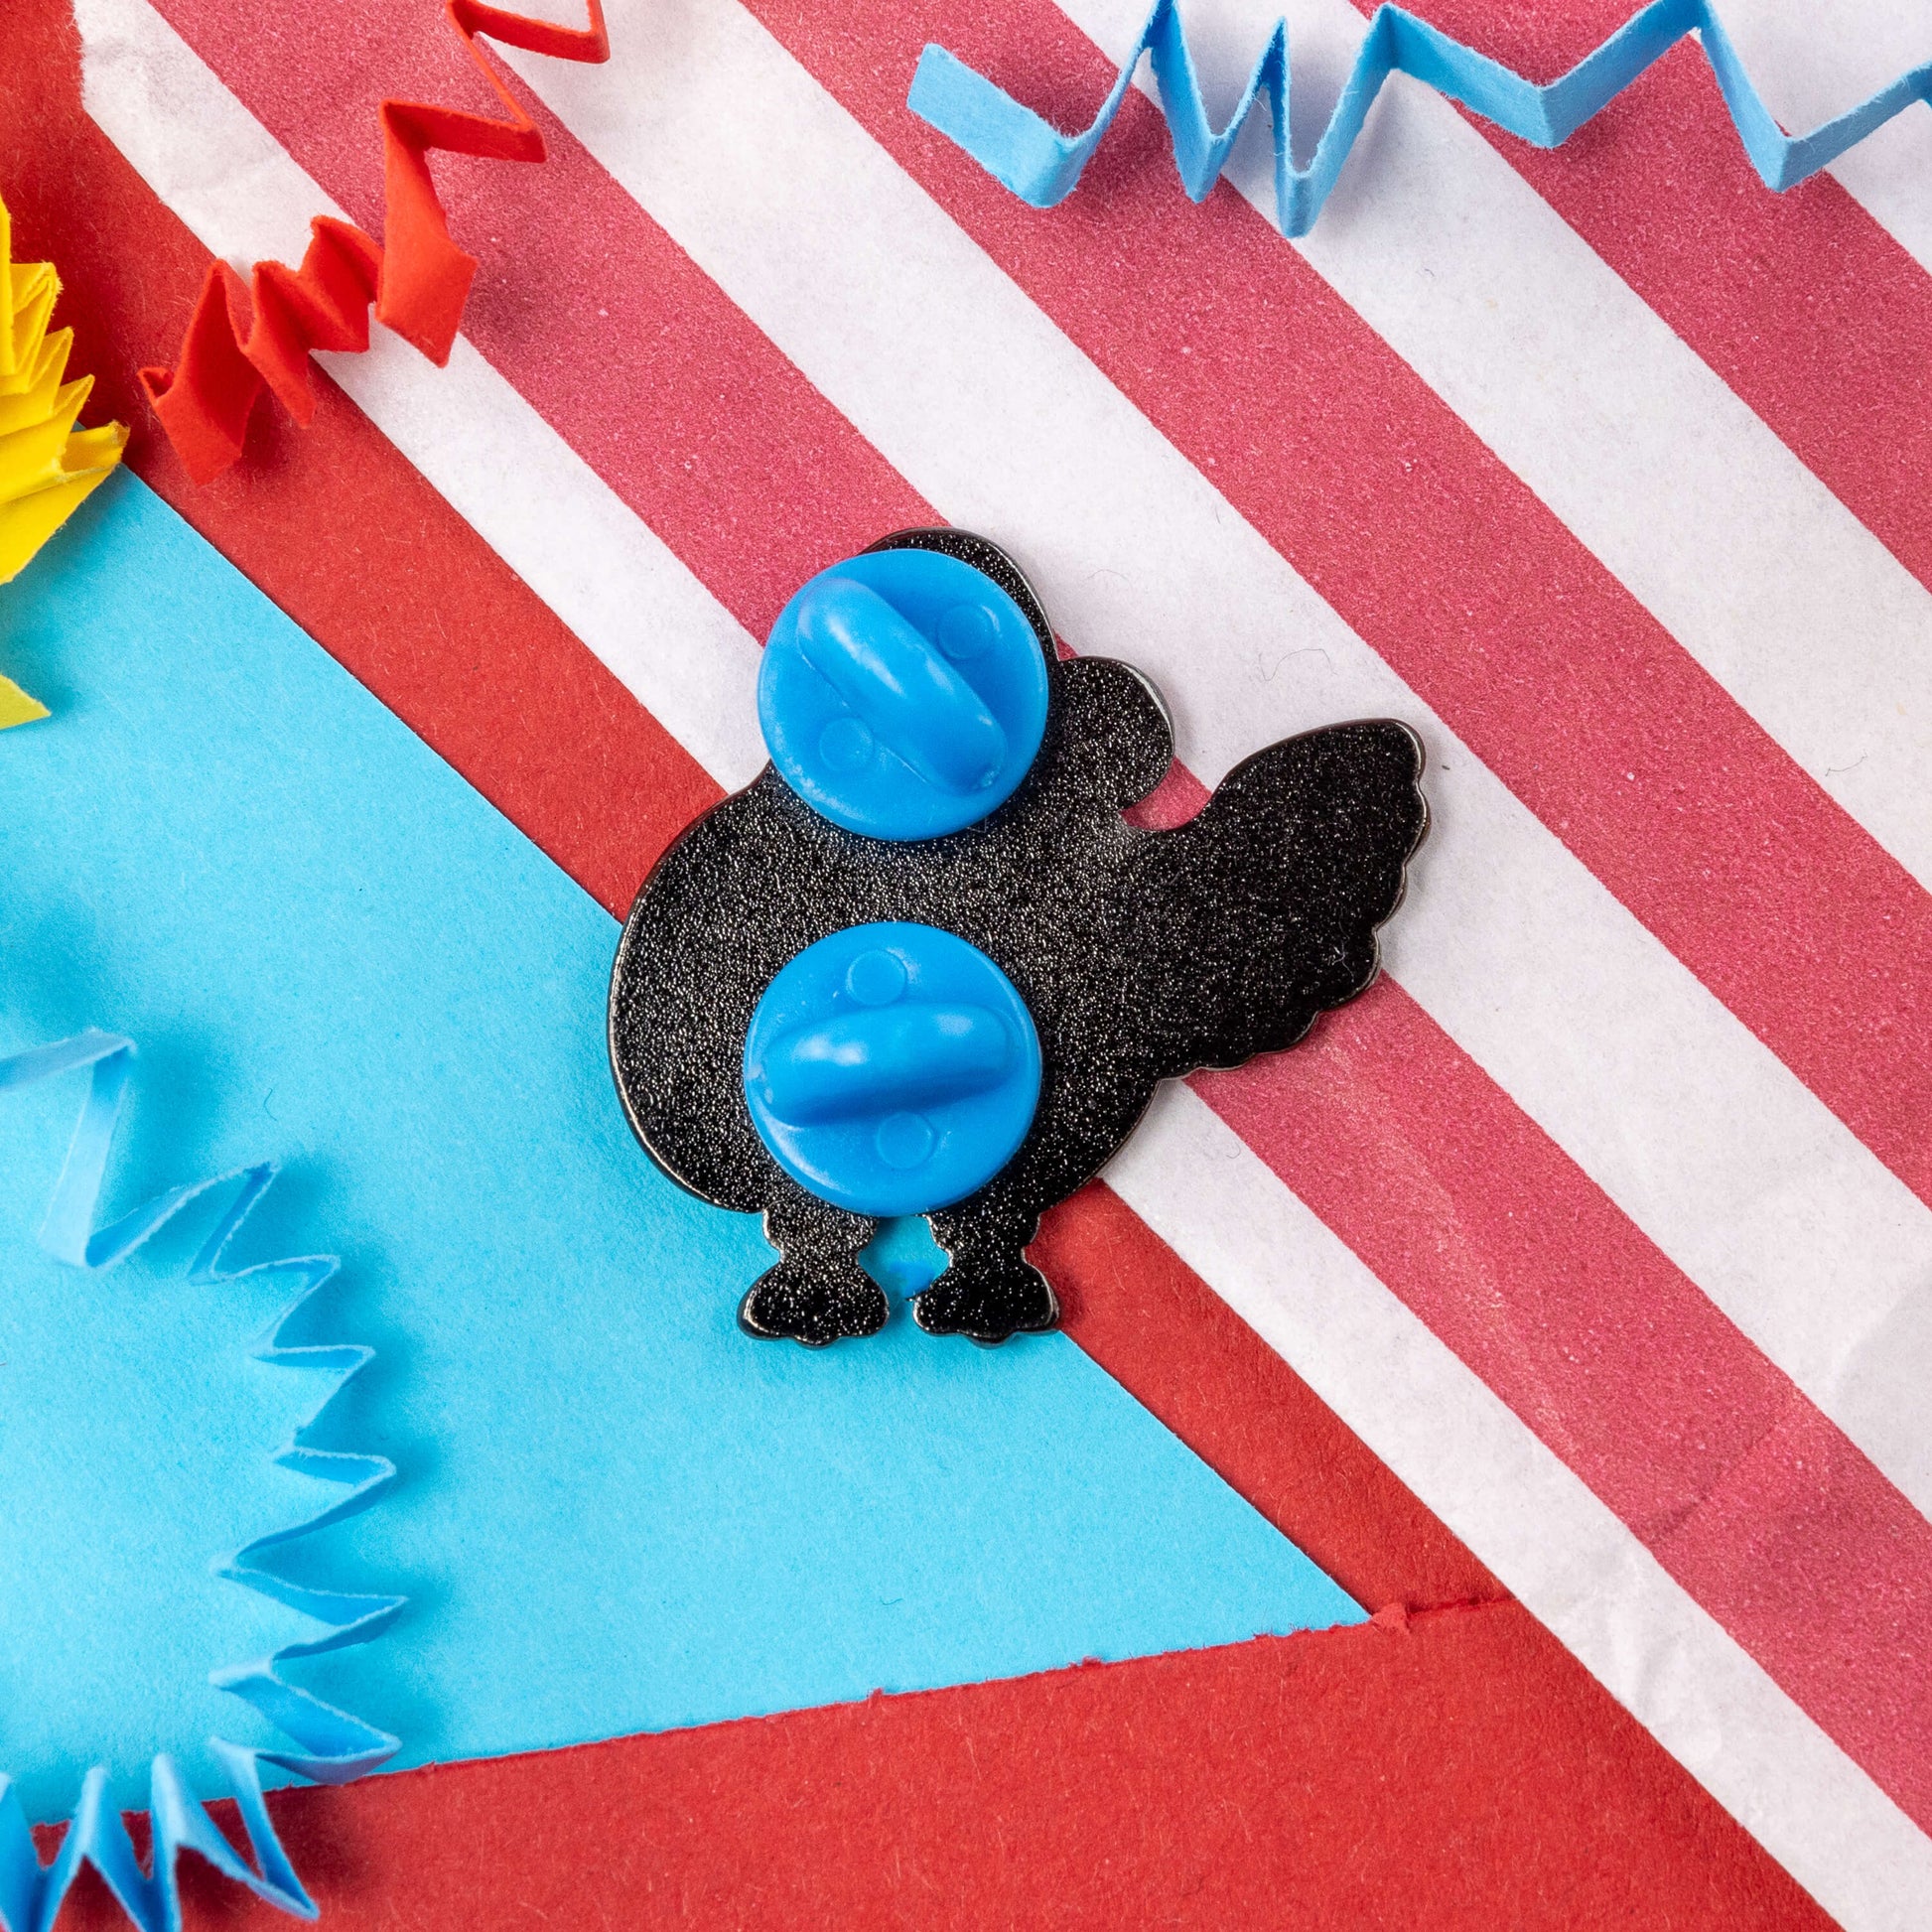 The Dyscalcoolia Pigeon Enamel Pin - Dyscalculia on a red, blue, green and yellow crinkle card confetti background. The enamel pin is facing away to show the double blue rubber backings. The enamel pin is raising awareness for dyscalculia.